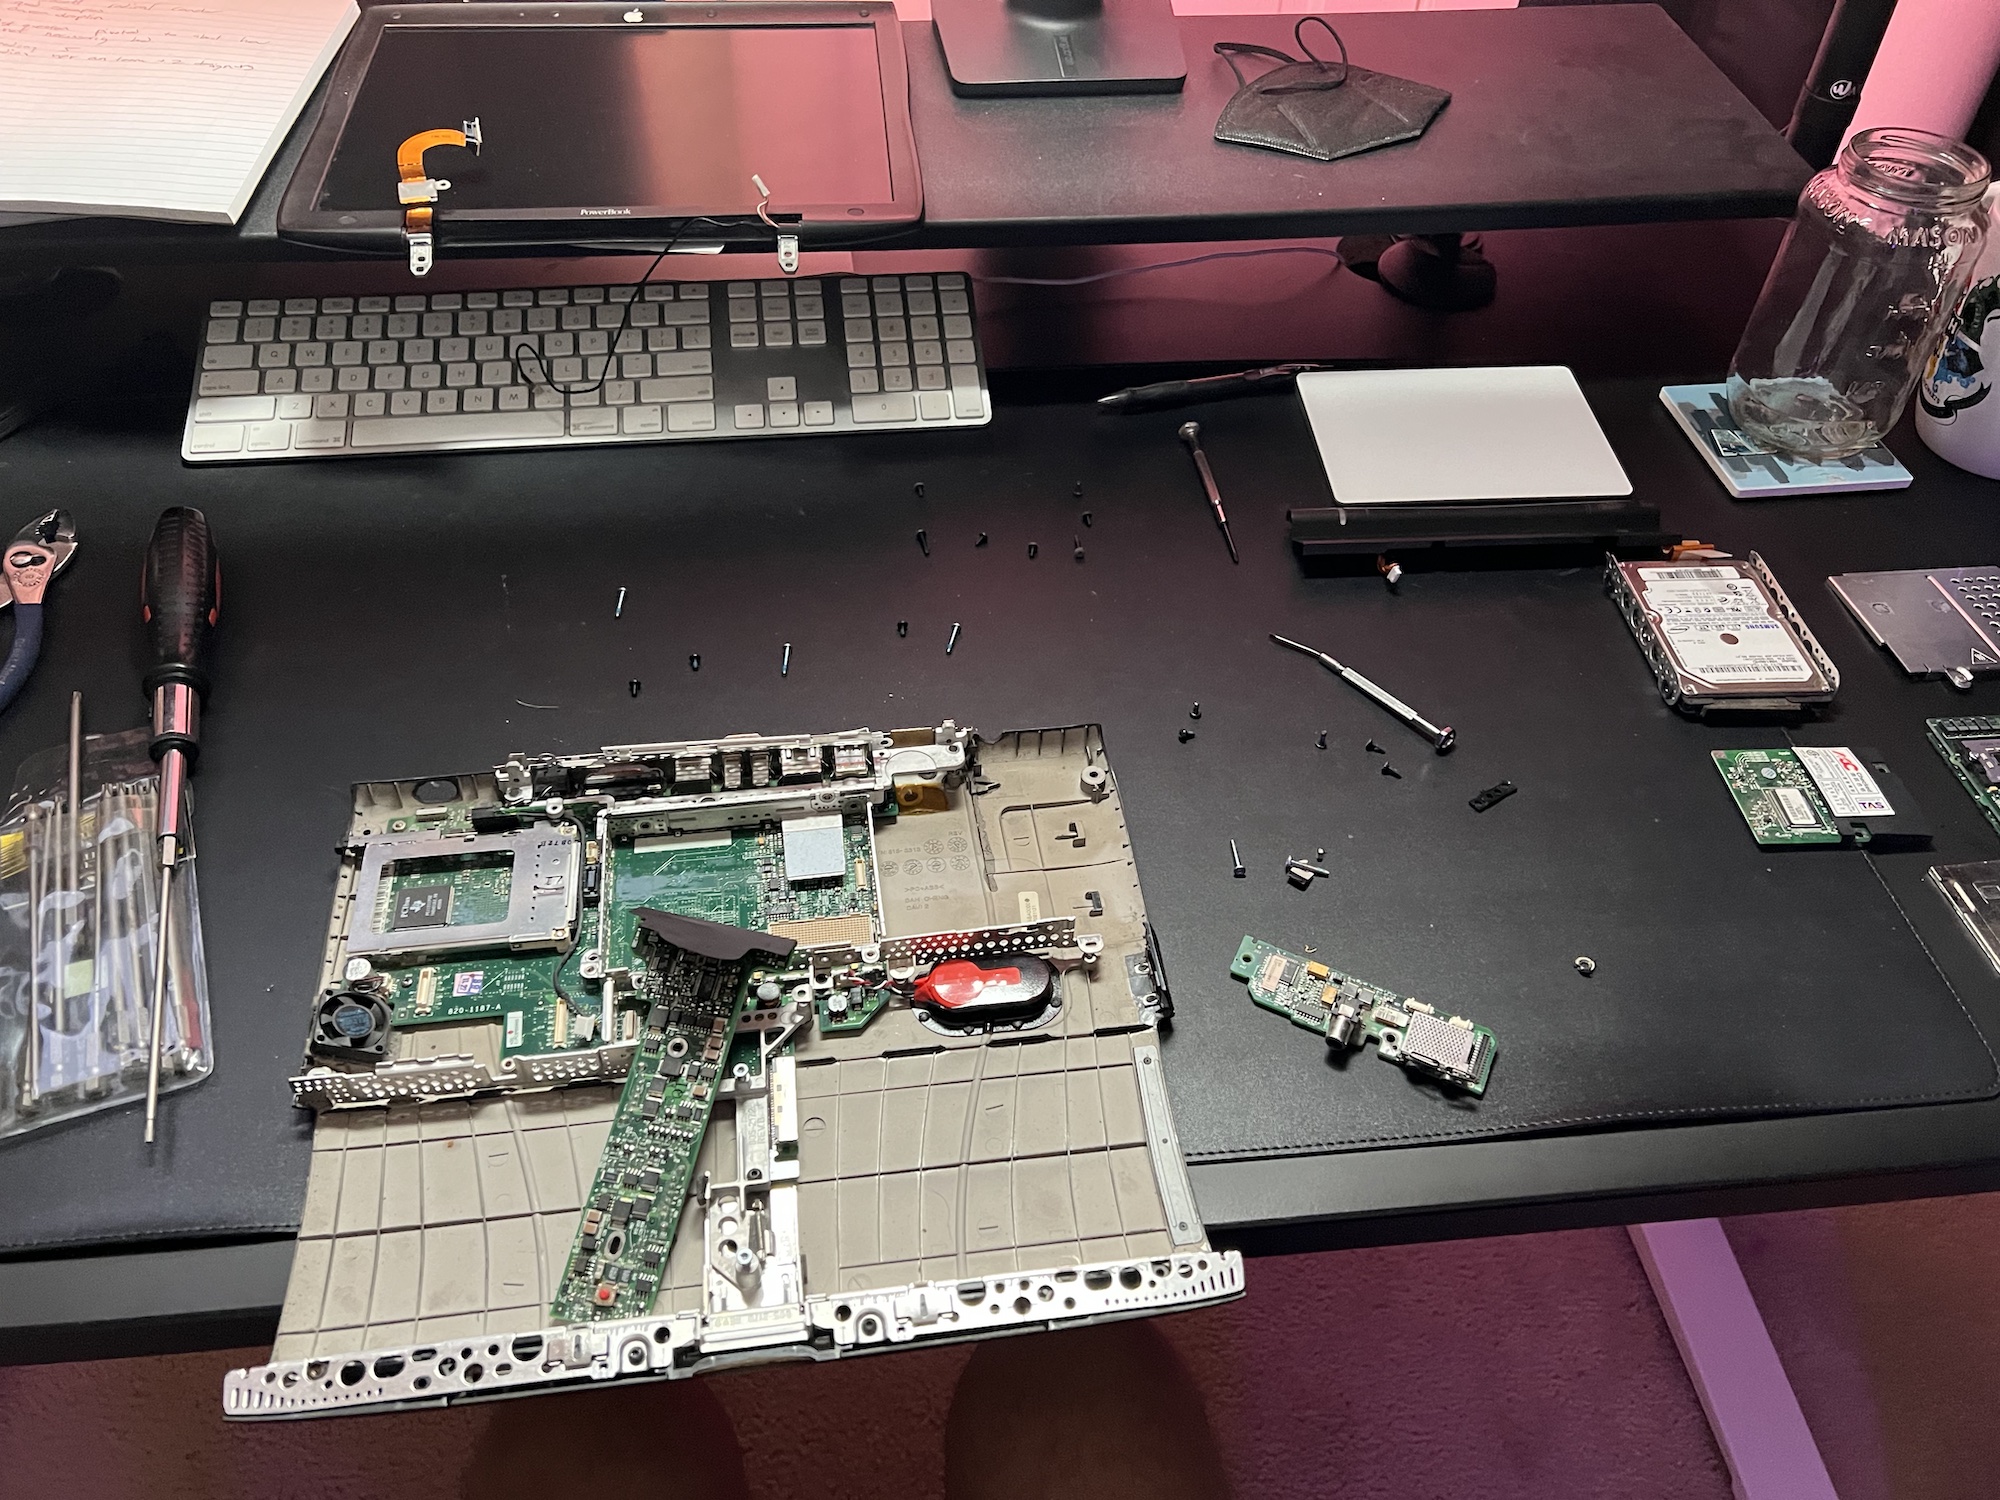 PowerBook G3 Pismo mostly disassembled